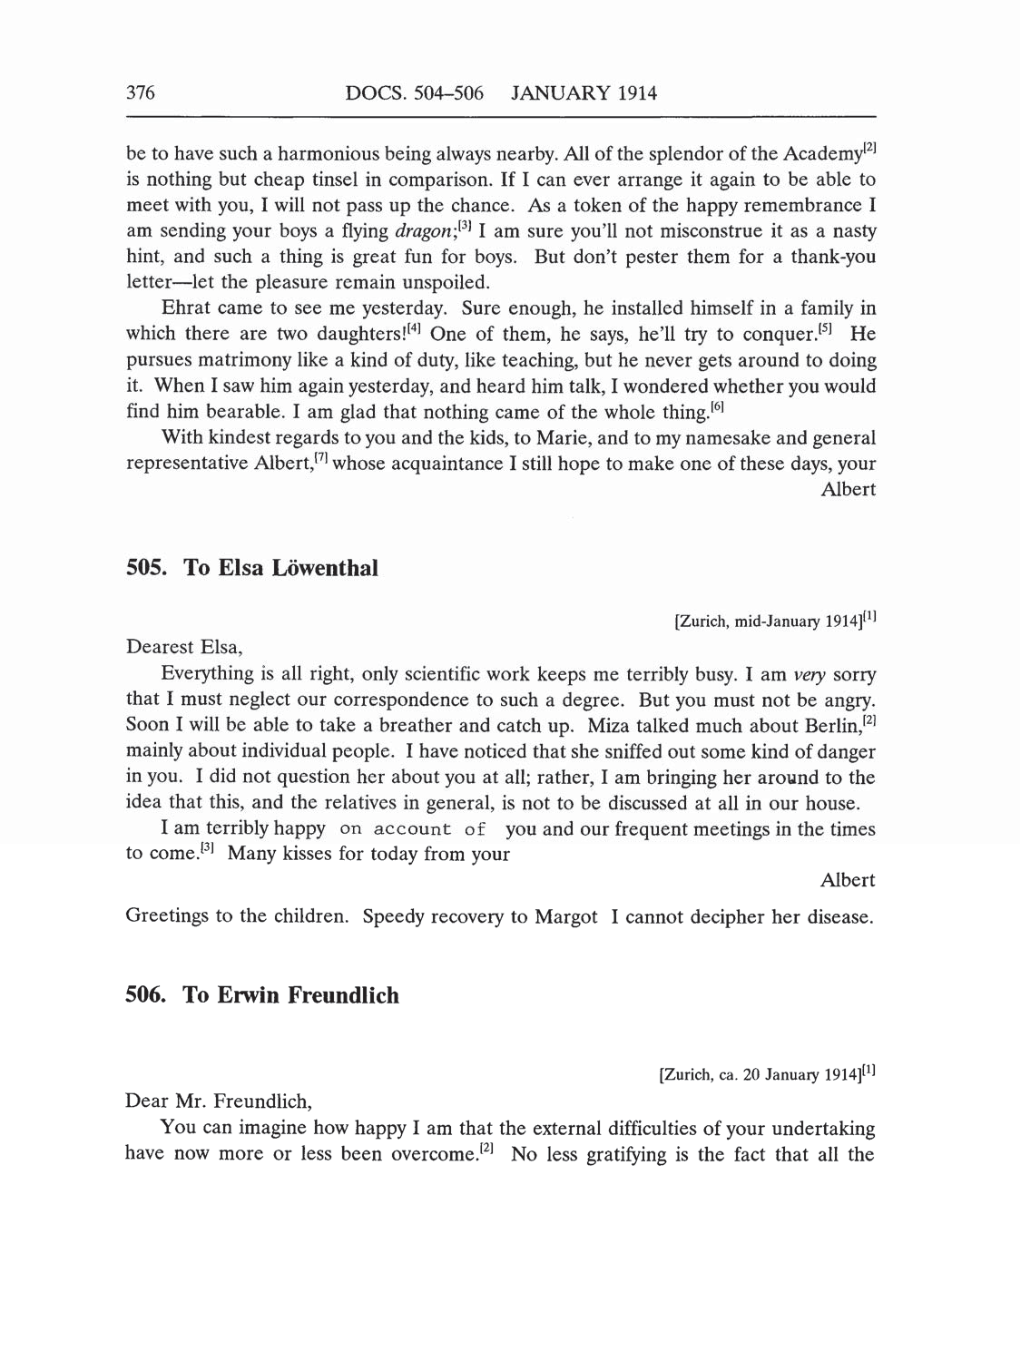 Volume 5: The Swiss Years: Correspondence, 1902-1914 (English translation supplement) page 376